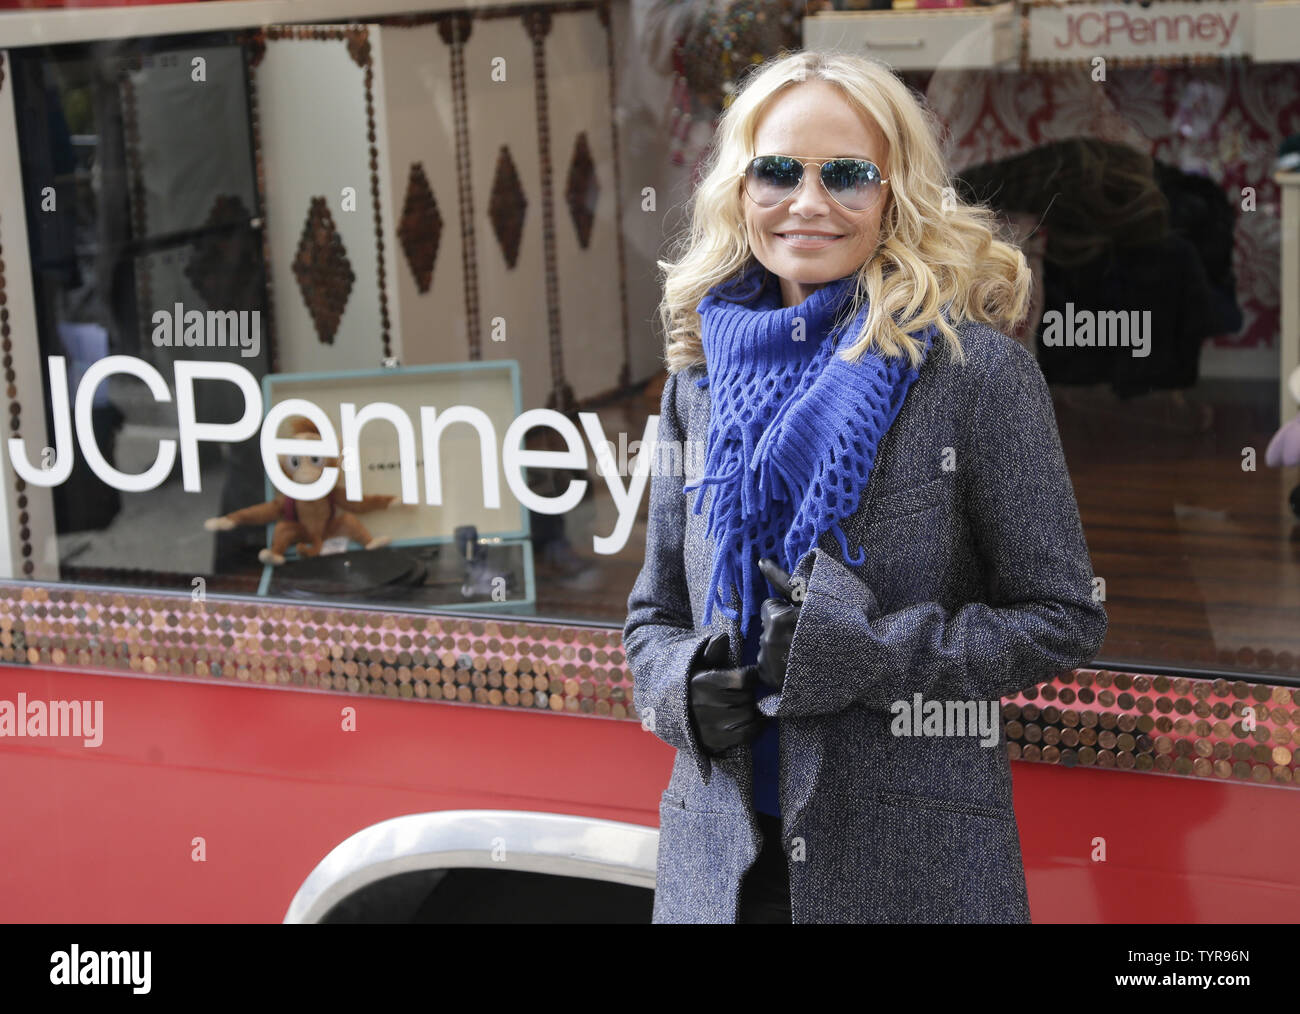 J c penney shopping bag hi-res stock photography and images - Alamy